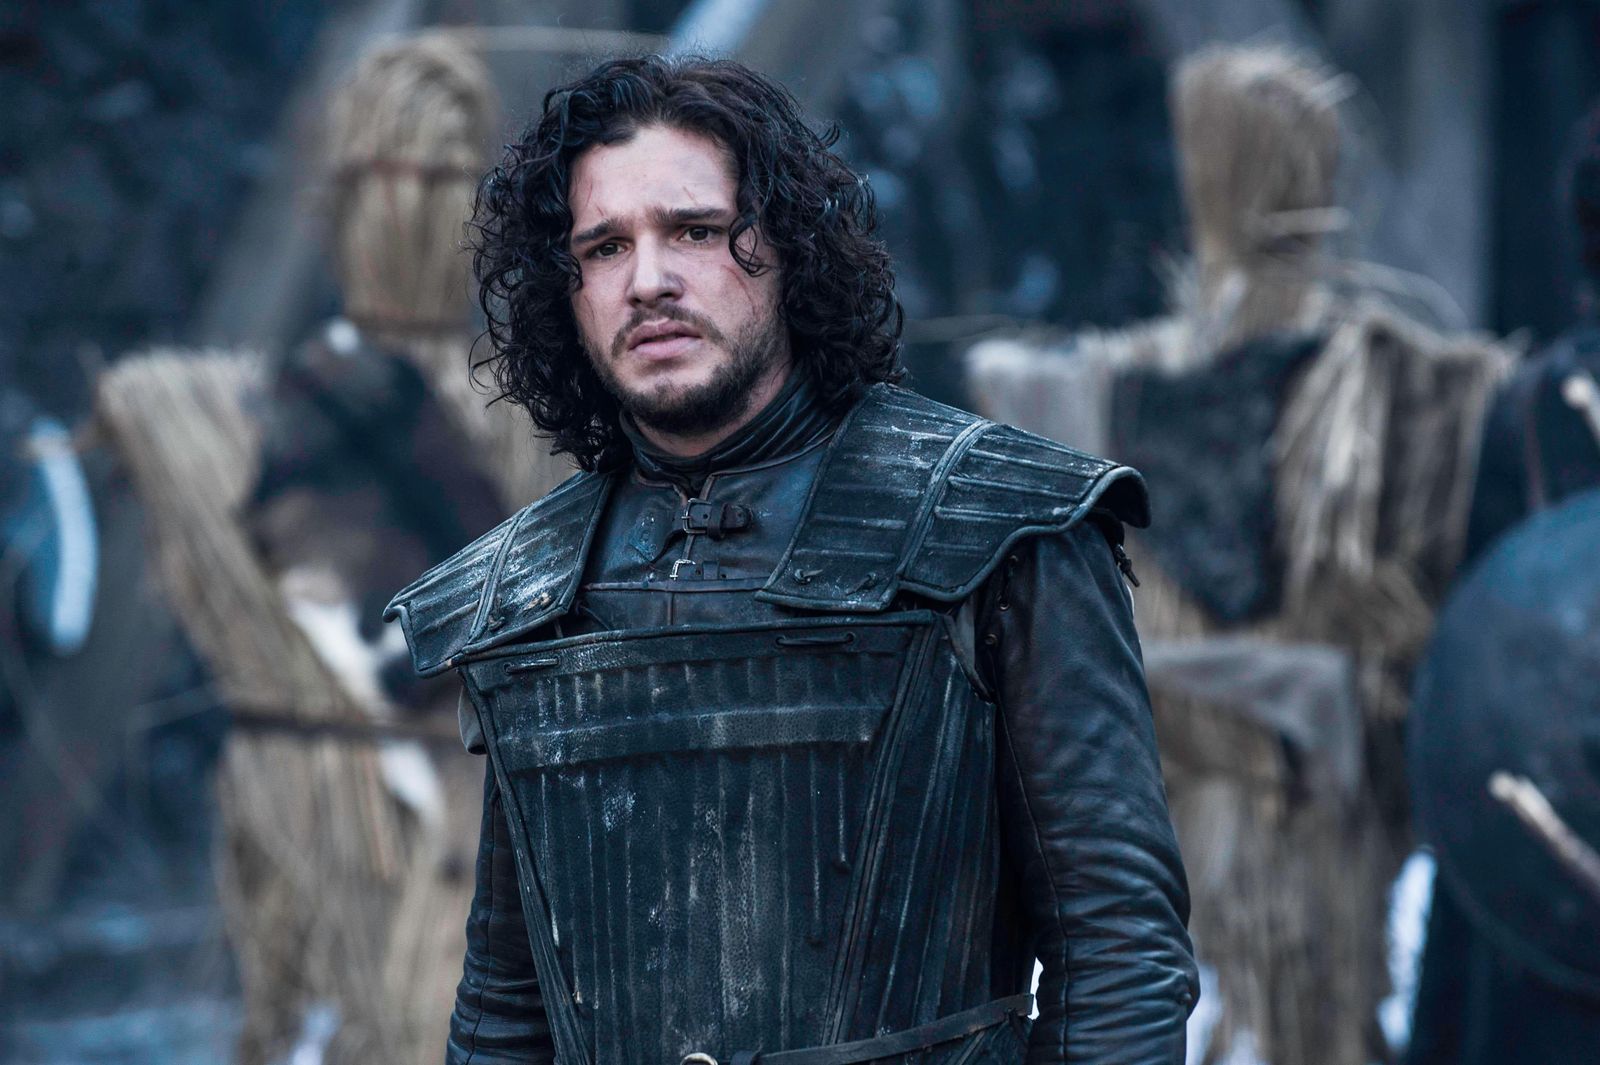 Game Of Thrones Star Kit Harington Hasn't Watched The Final Season Yet Says 'That's How I Dealt With Controversy'